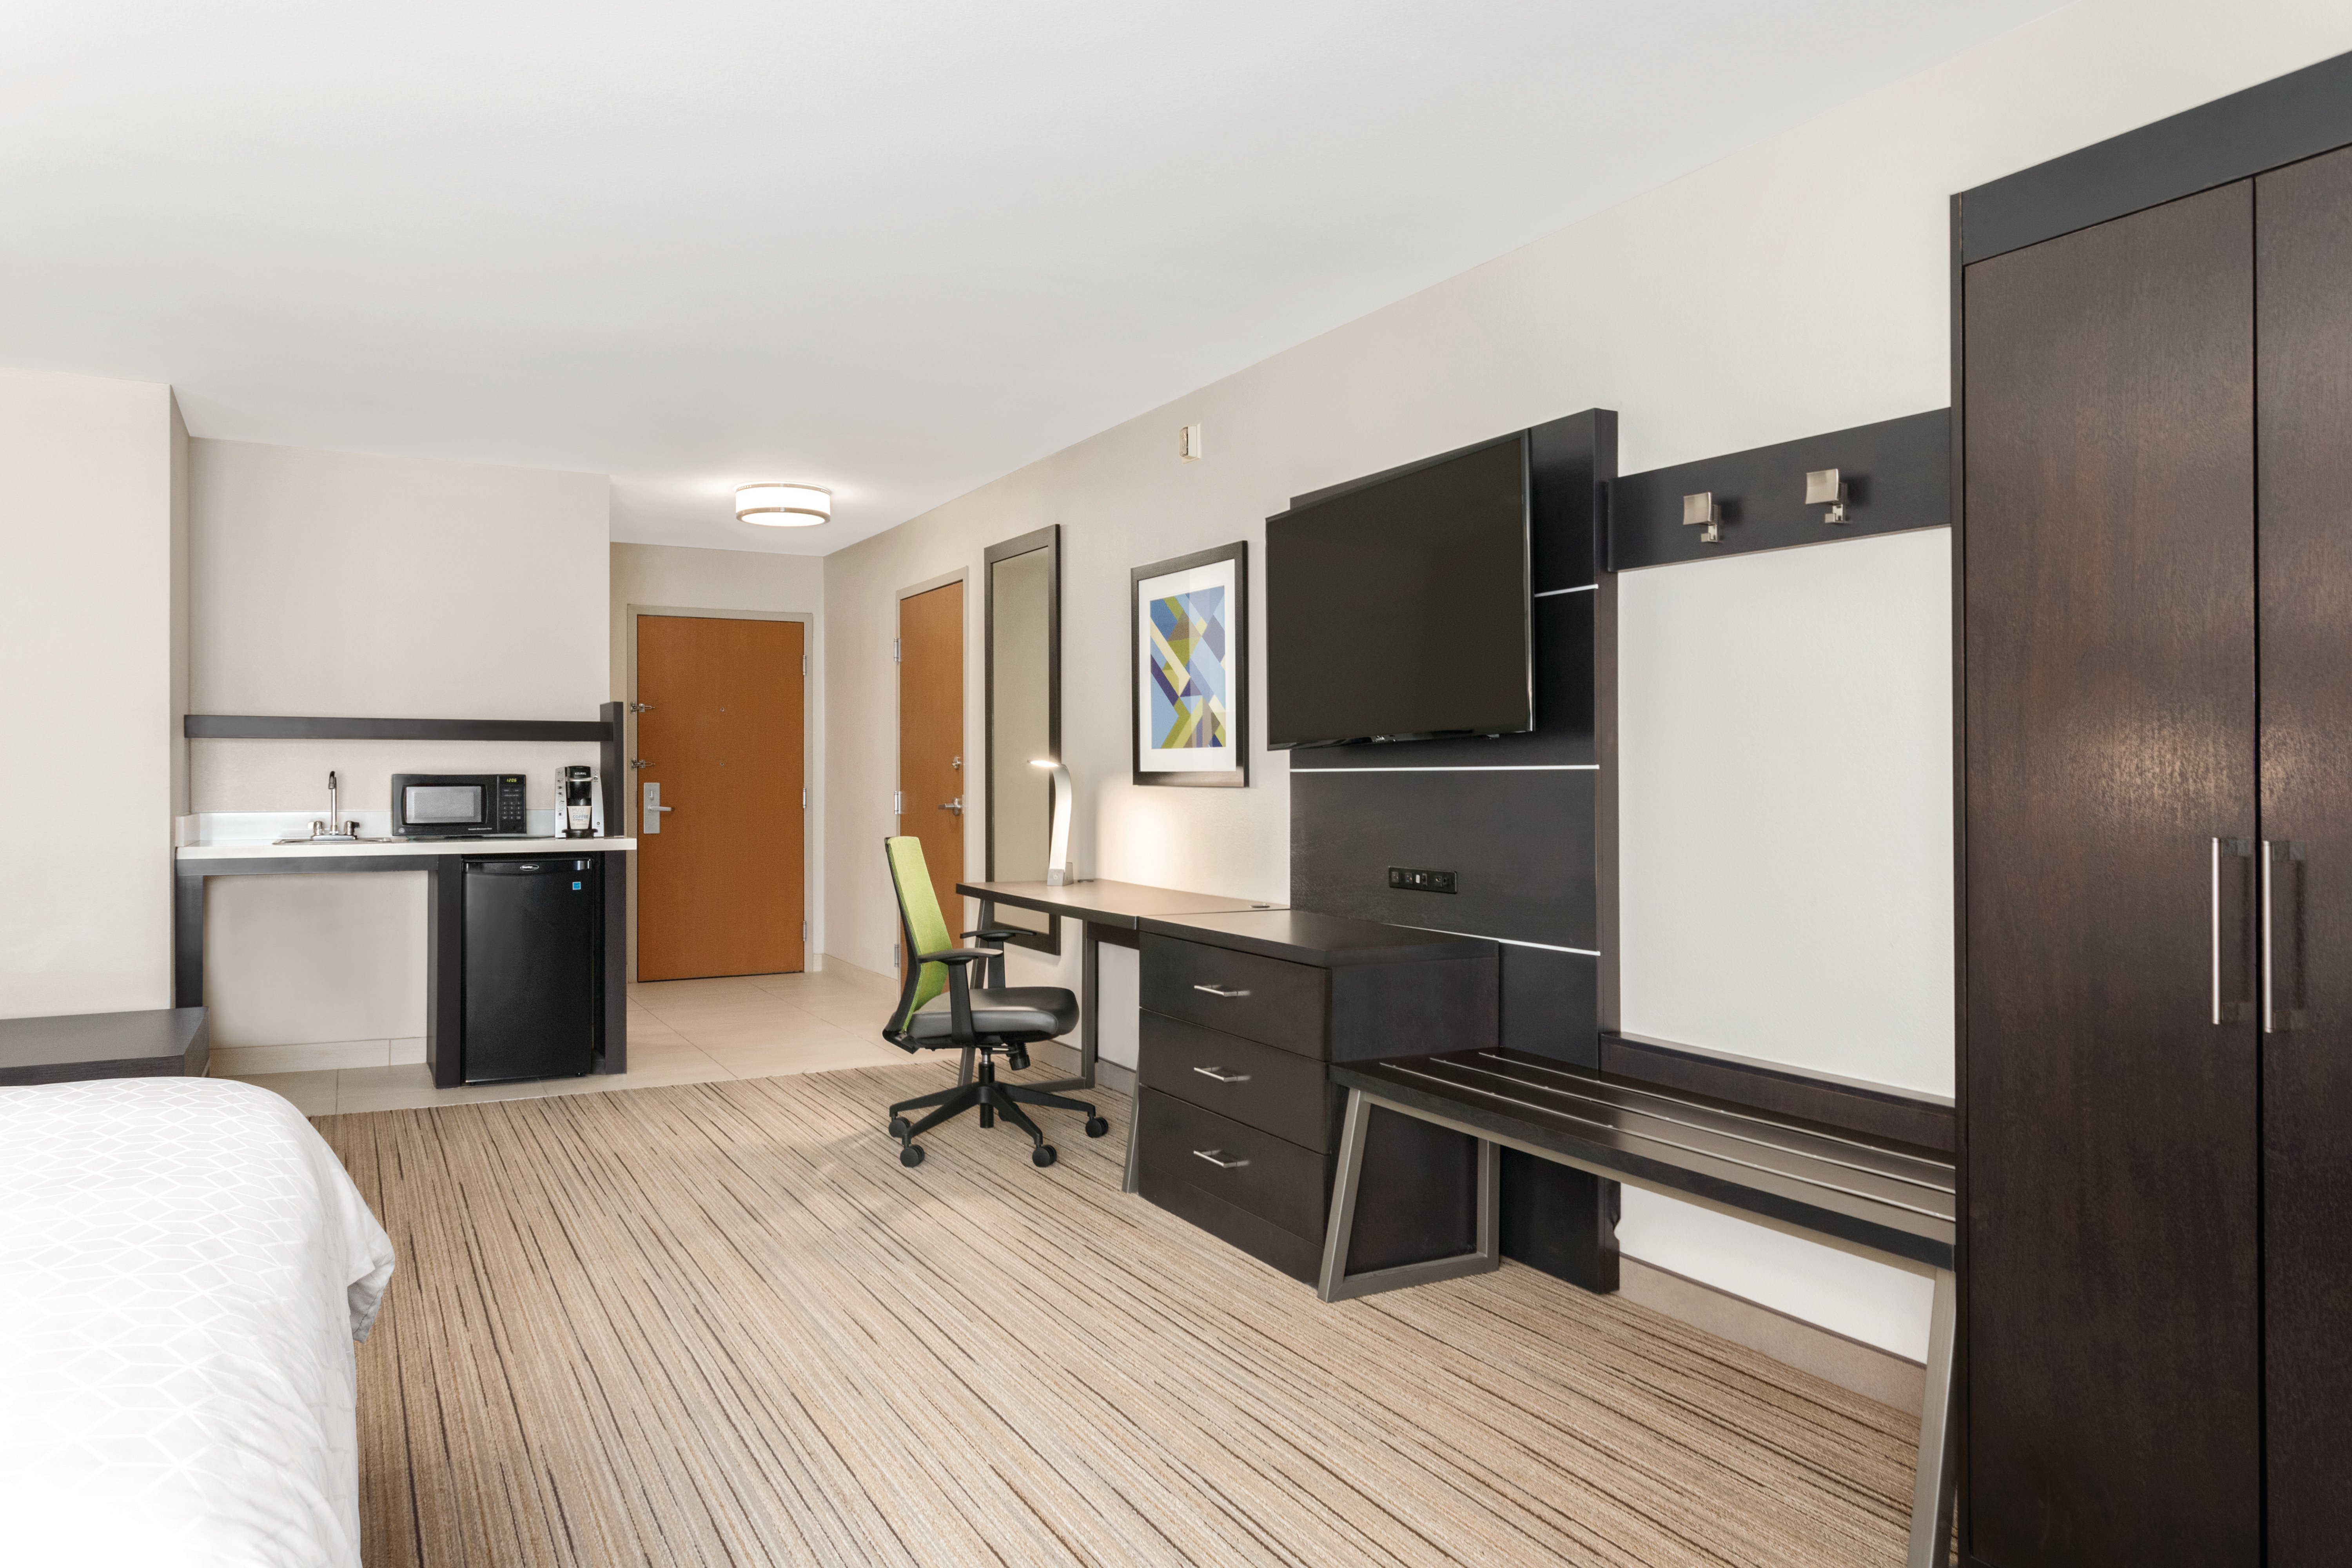 We designed our ADA mobility accessible rooms for easy wheelchair